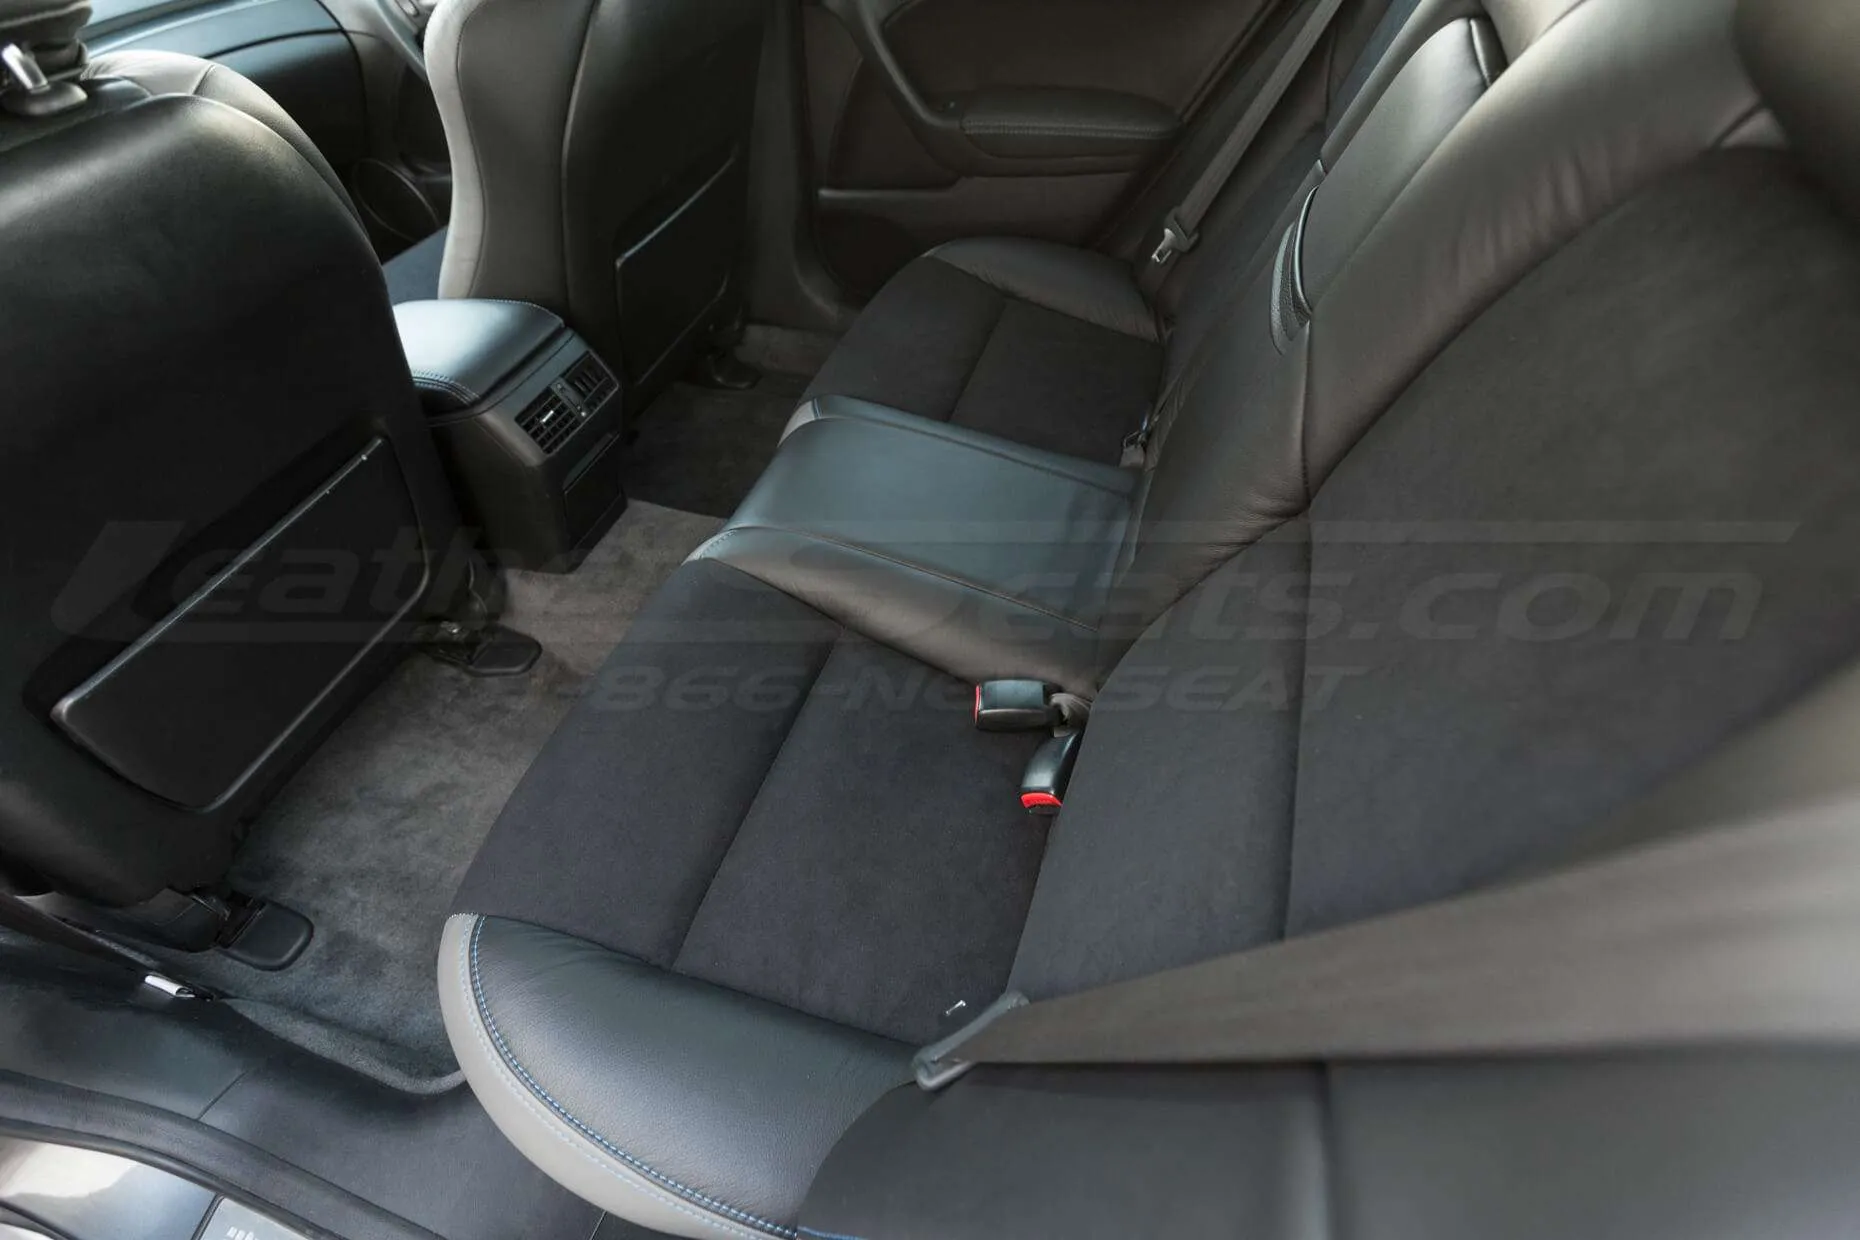 Installed rear seat upholstery - downward view - 04- 08 Acura TL Black, Black Suede & Light Grey Kit